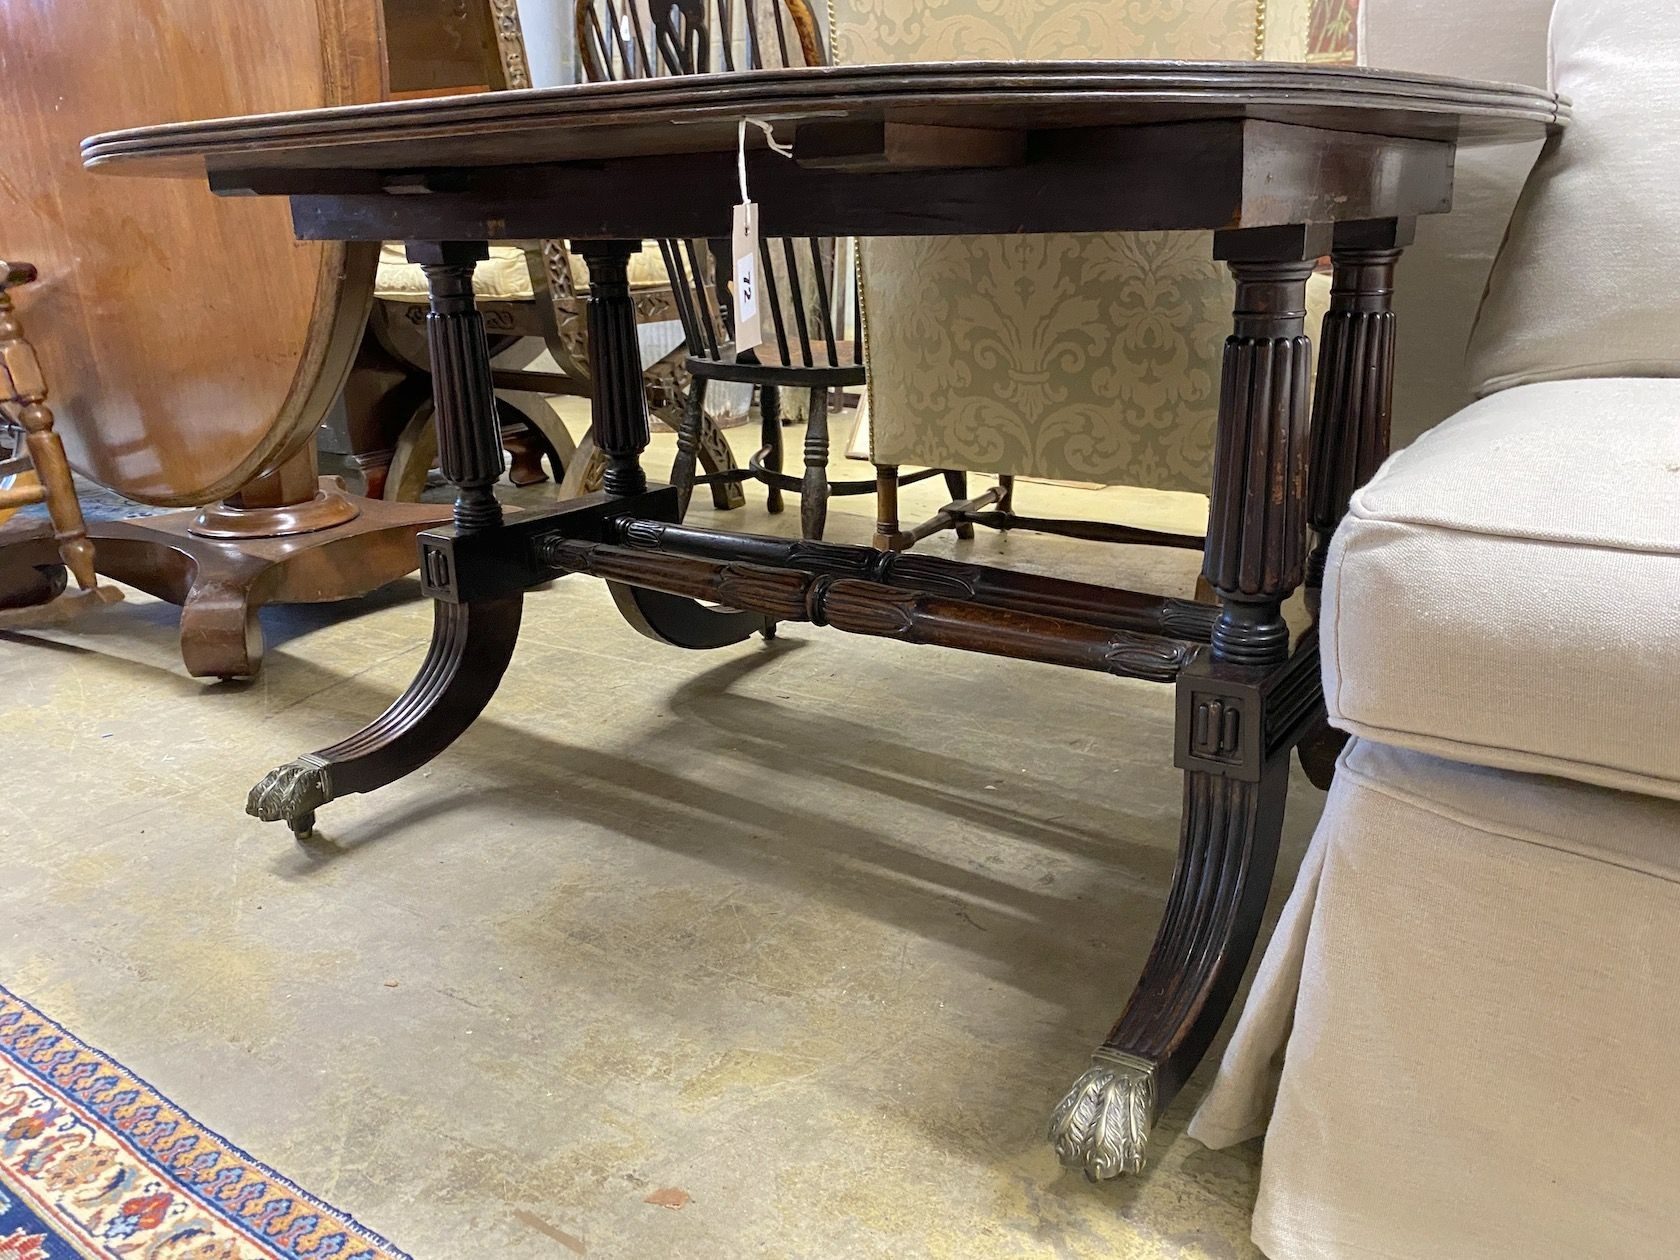 A George IV oval mahogany dining table (no leaves, altered), length 118cm, width 120cm, height 71cm